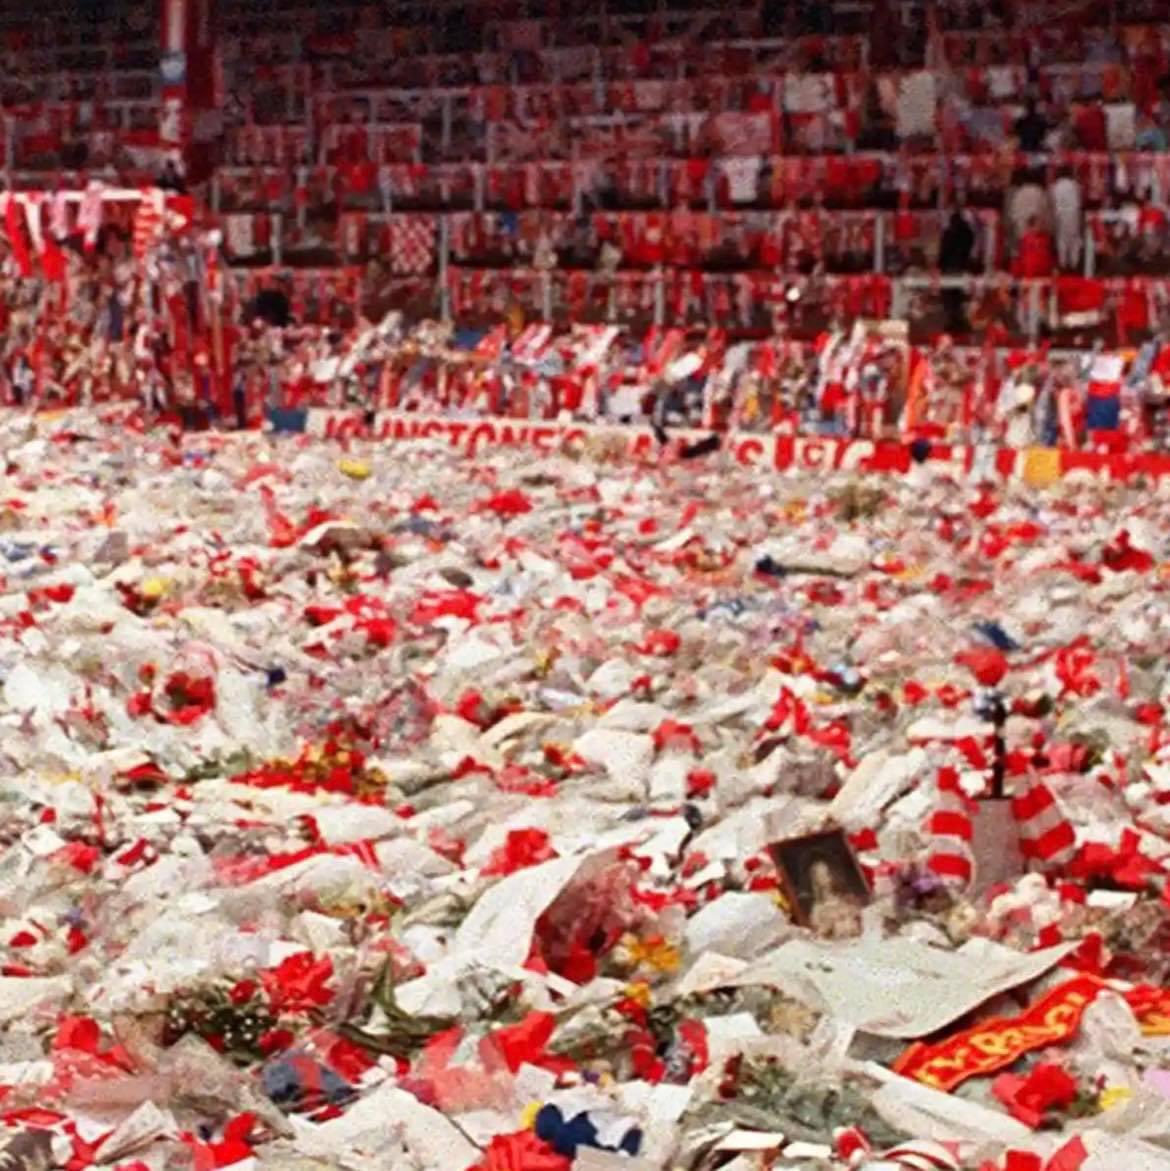 To the 97 men, women and children I left behind at a football stadium in Sheffield on the 15th April, 1989 life has never been the same since. Gone but never forgotten. #YNWA #JFT97 #Hillsborough